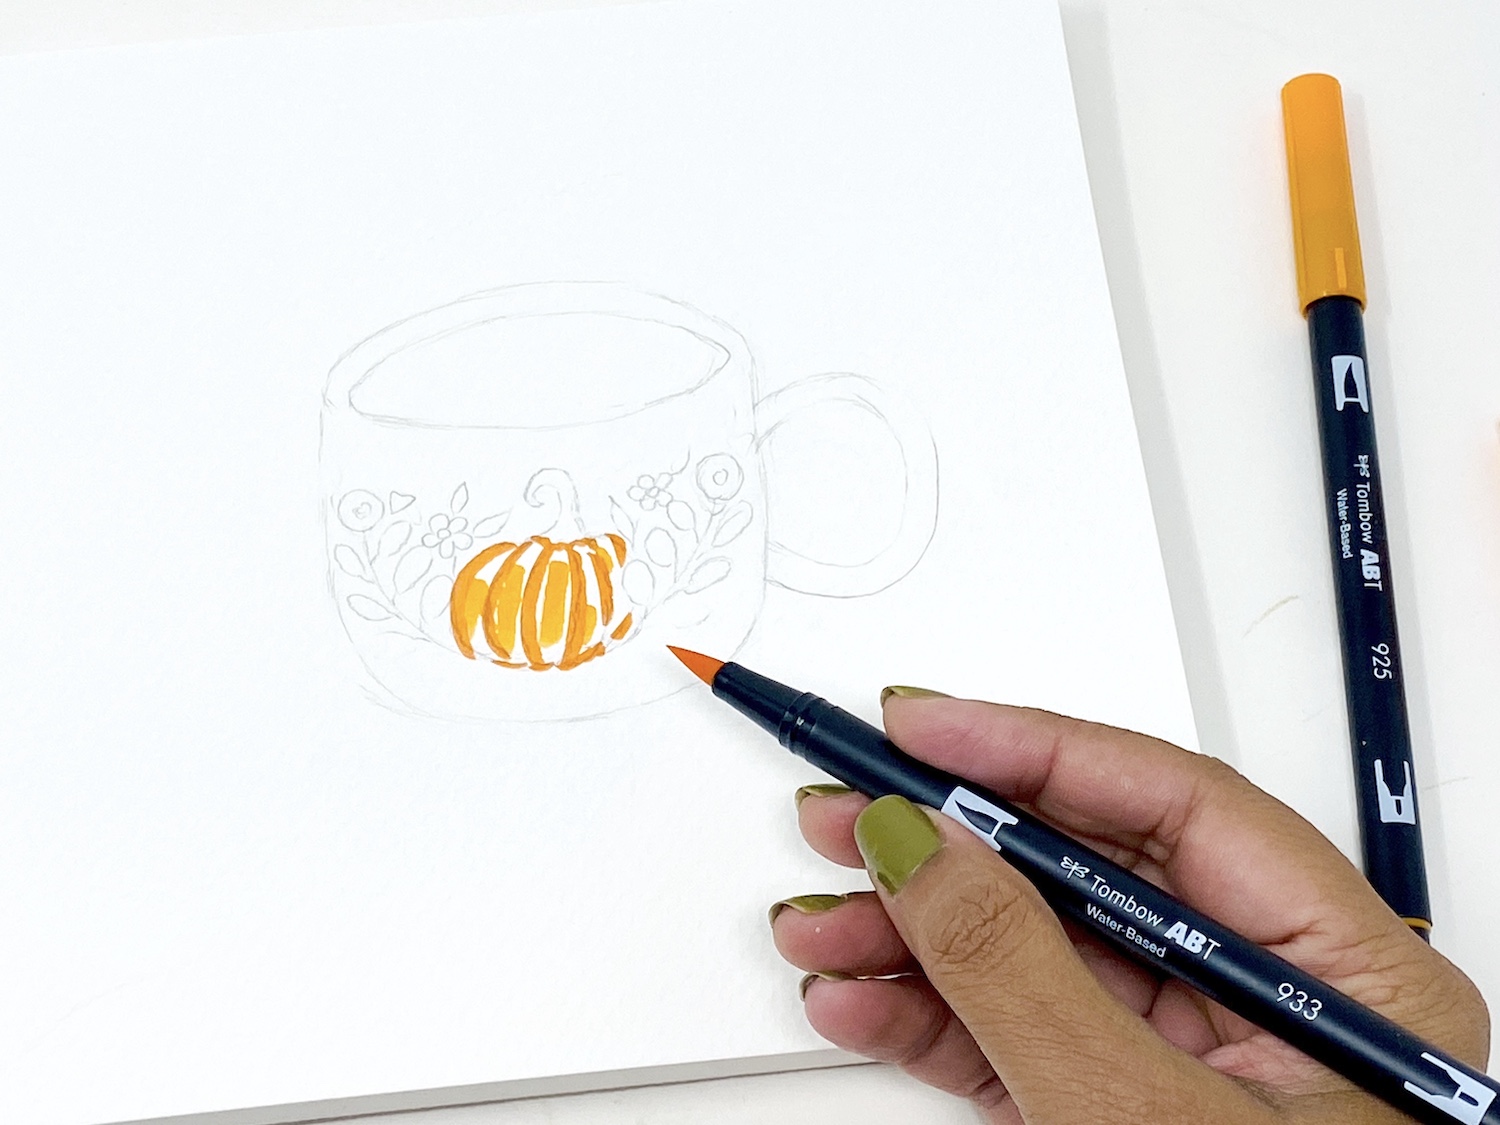 Teacup Drawing - How To Draw A Teacup Step By Step